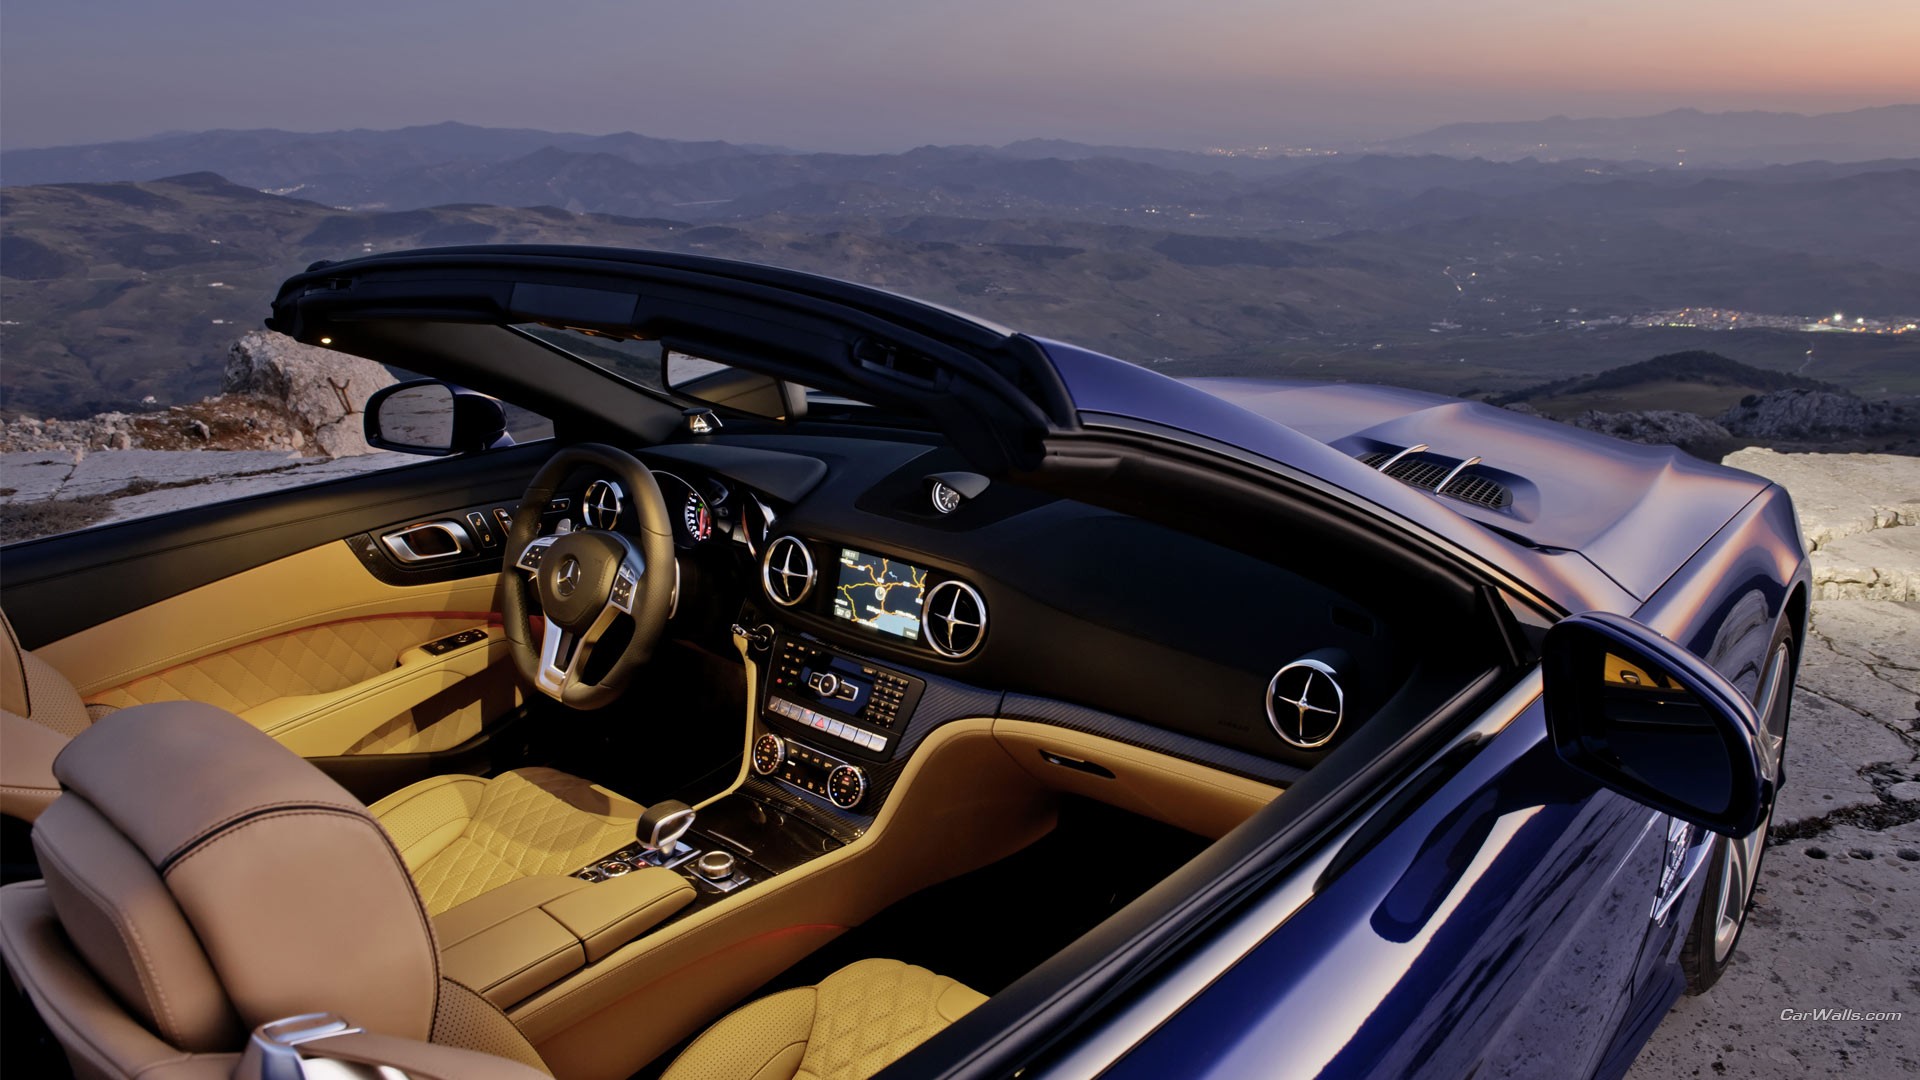 General 1920x1080 coupe blue cars car interior car vehicle Mercedes-Benz SL Mercedes-Benz R231 watermarked Mercedes-Benz convertible German cars